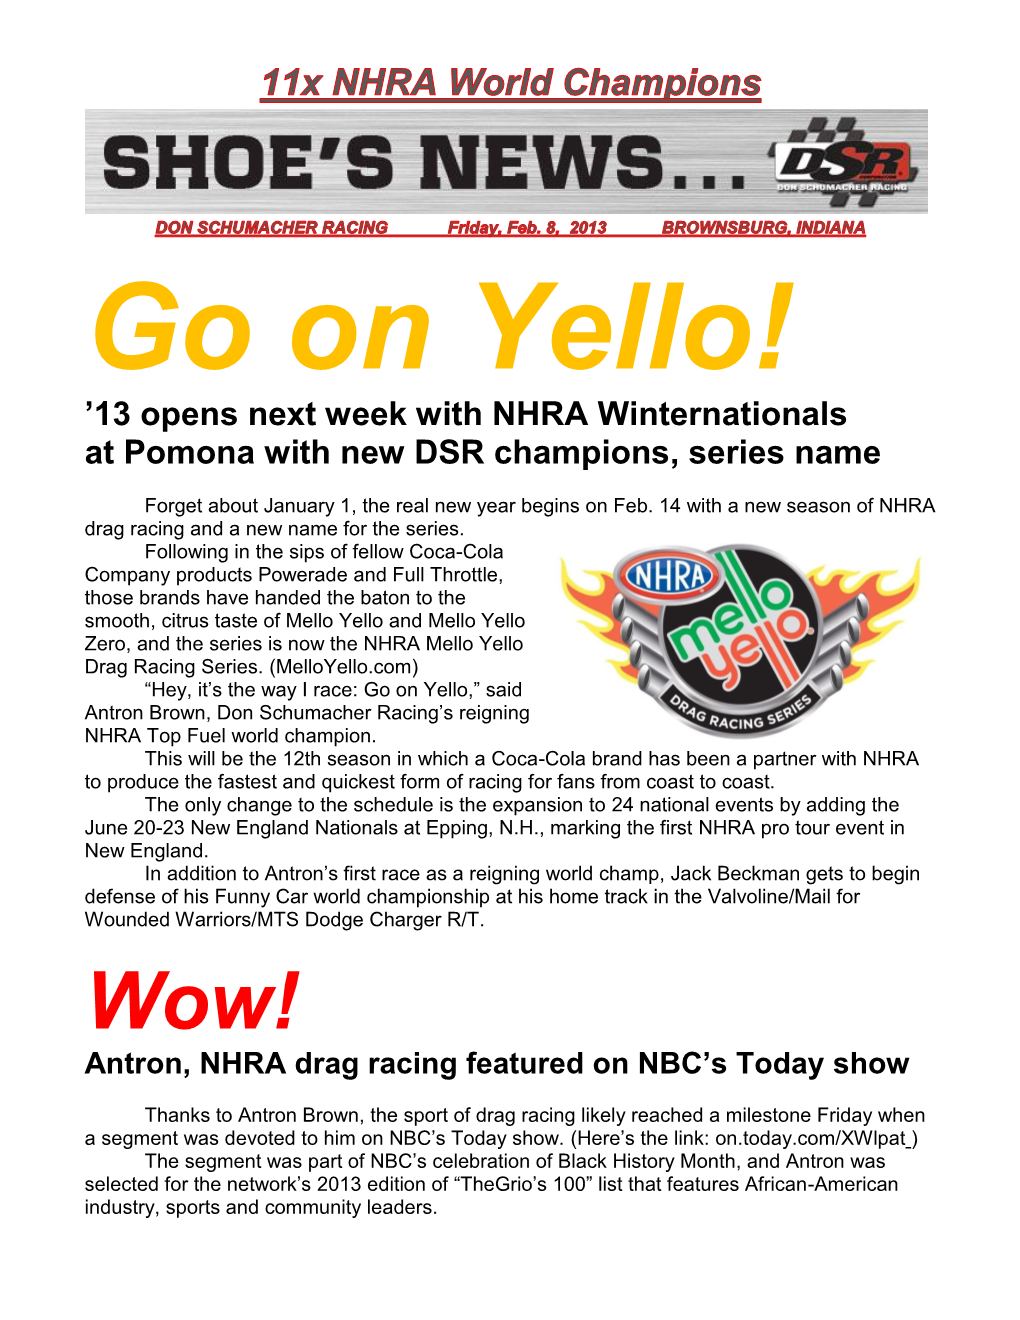 '13 Opens Next Week with NHRA Winternationals at Pomona With